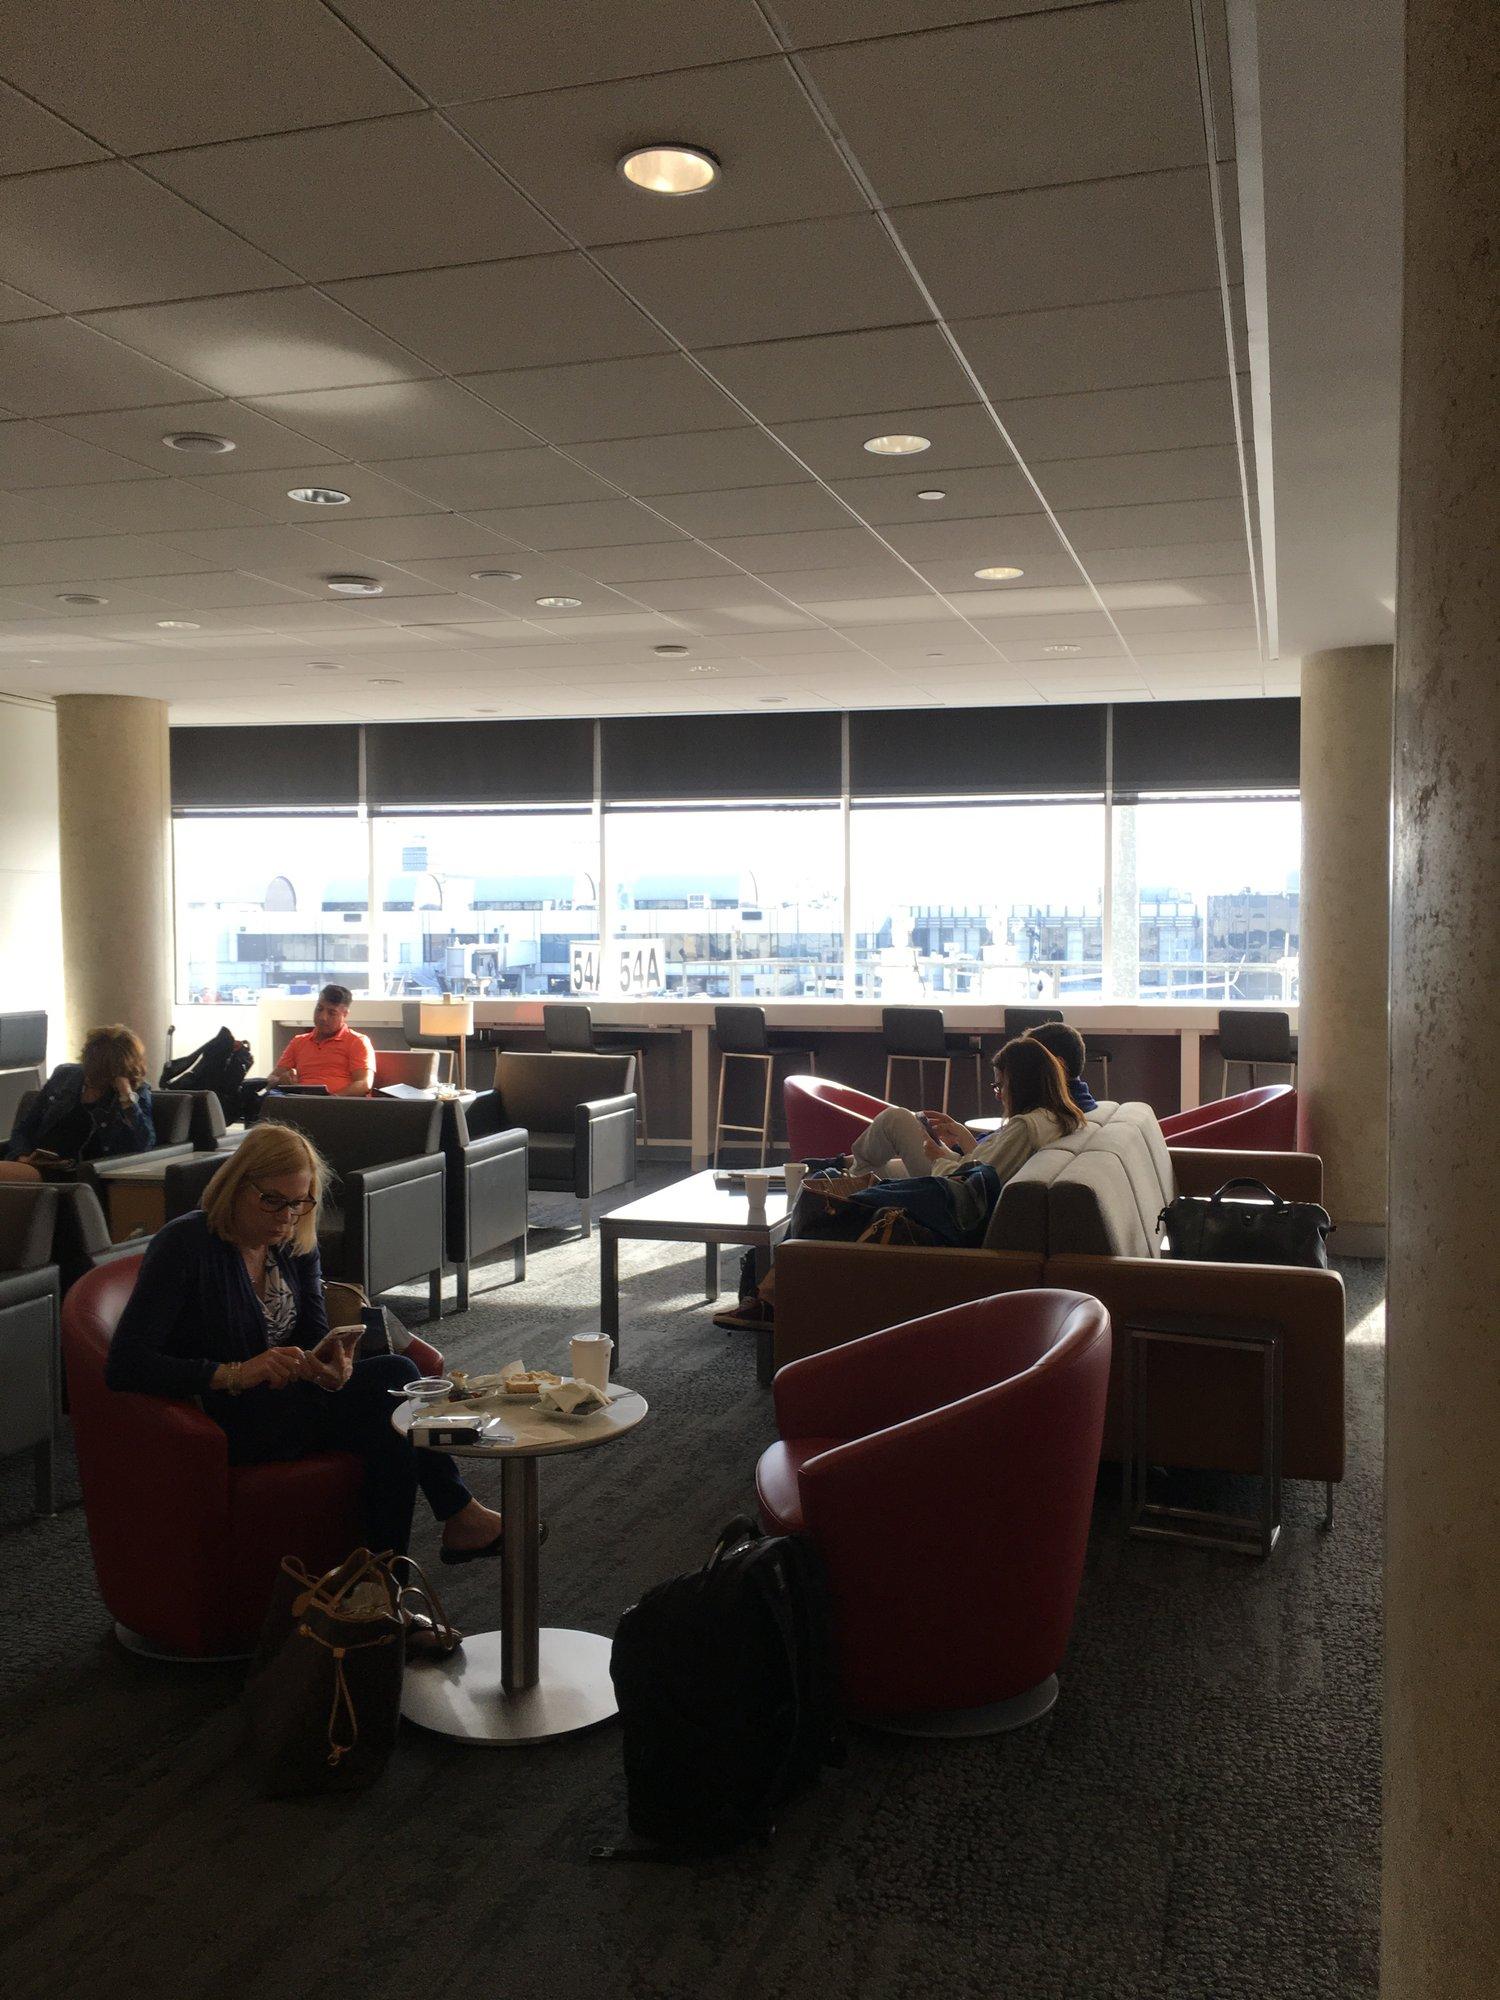 American Airlines Admirals Club image 16 of 38